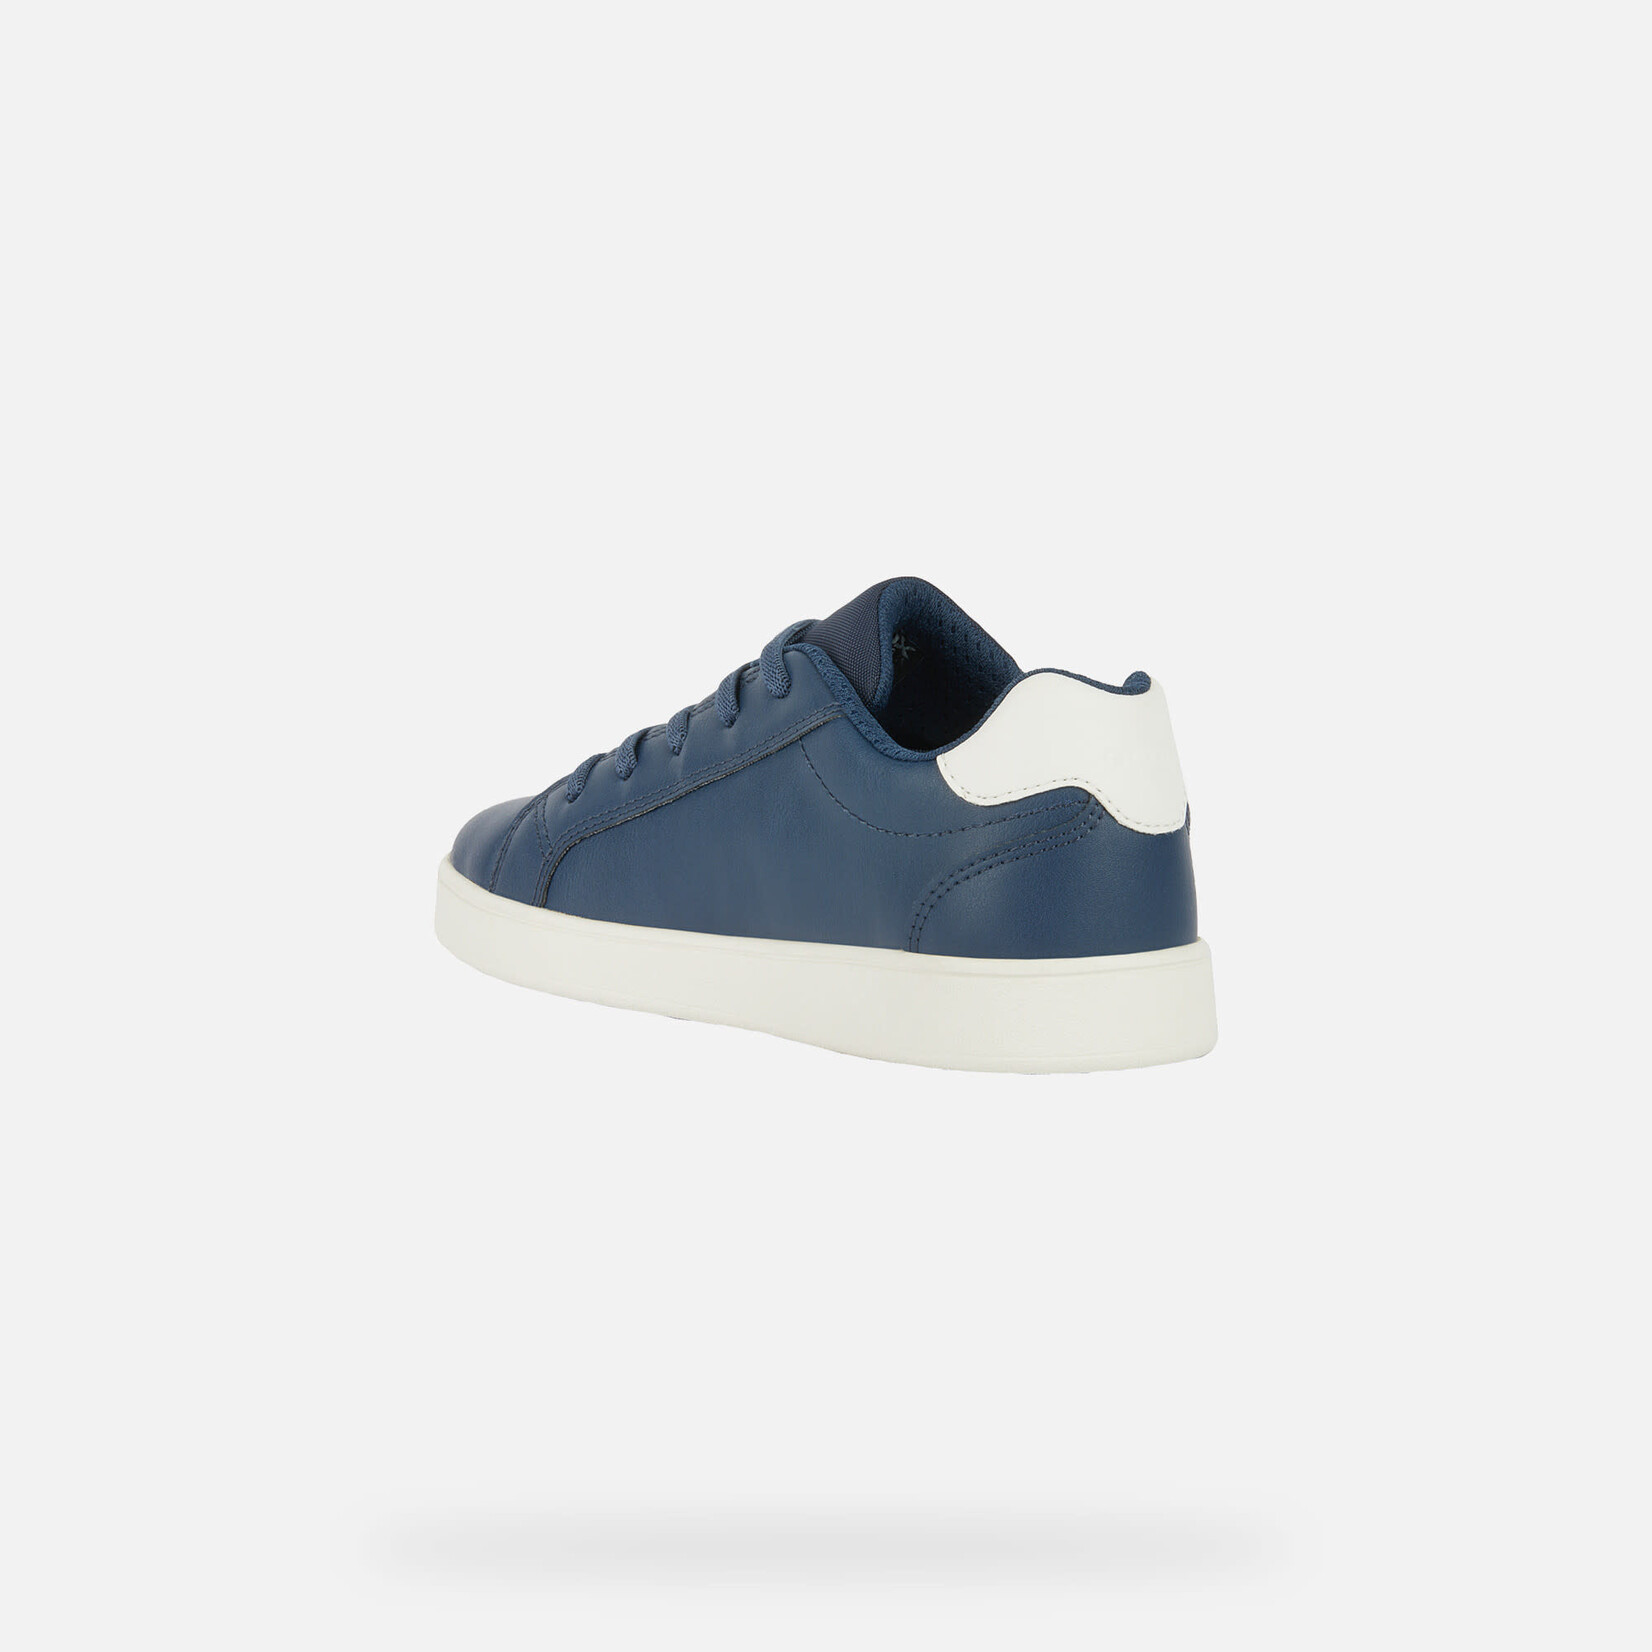 Geox GEOX - White synthetic leather sneakers 'Eclyper - Avio Navy/White'